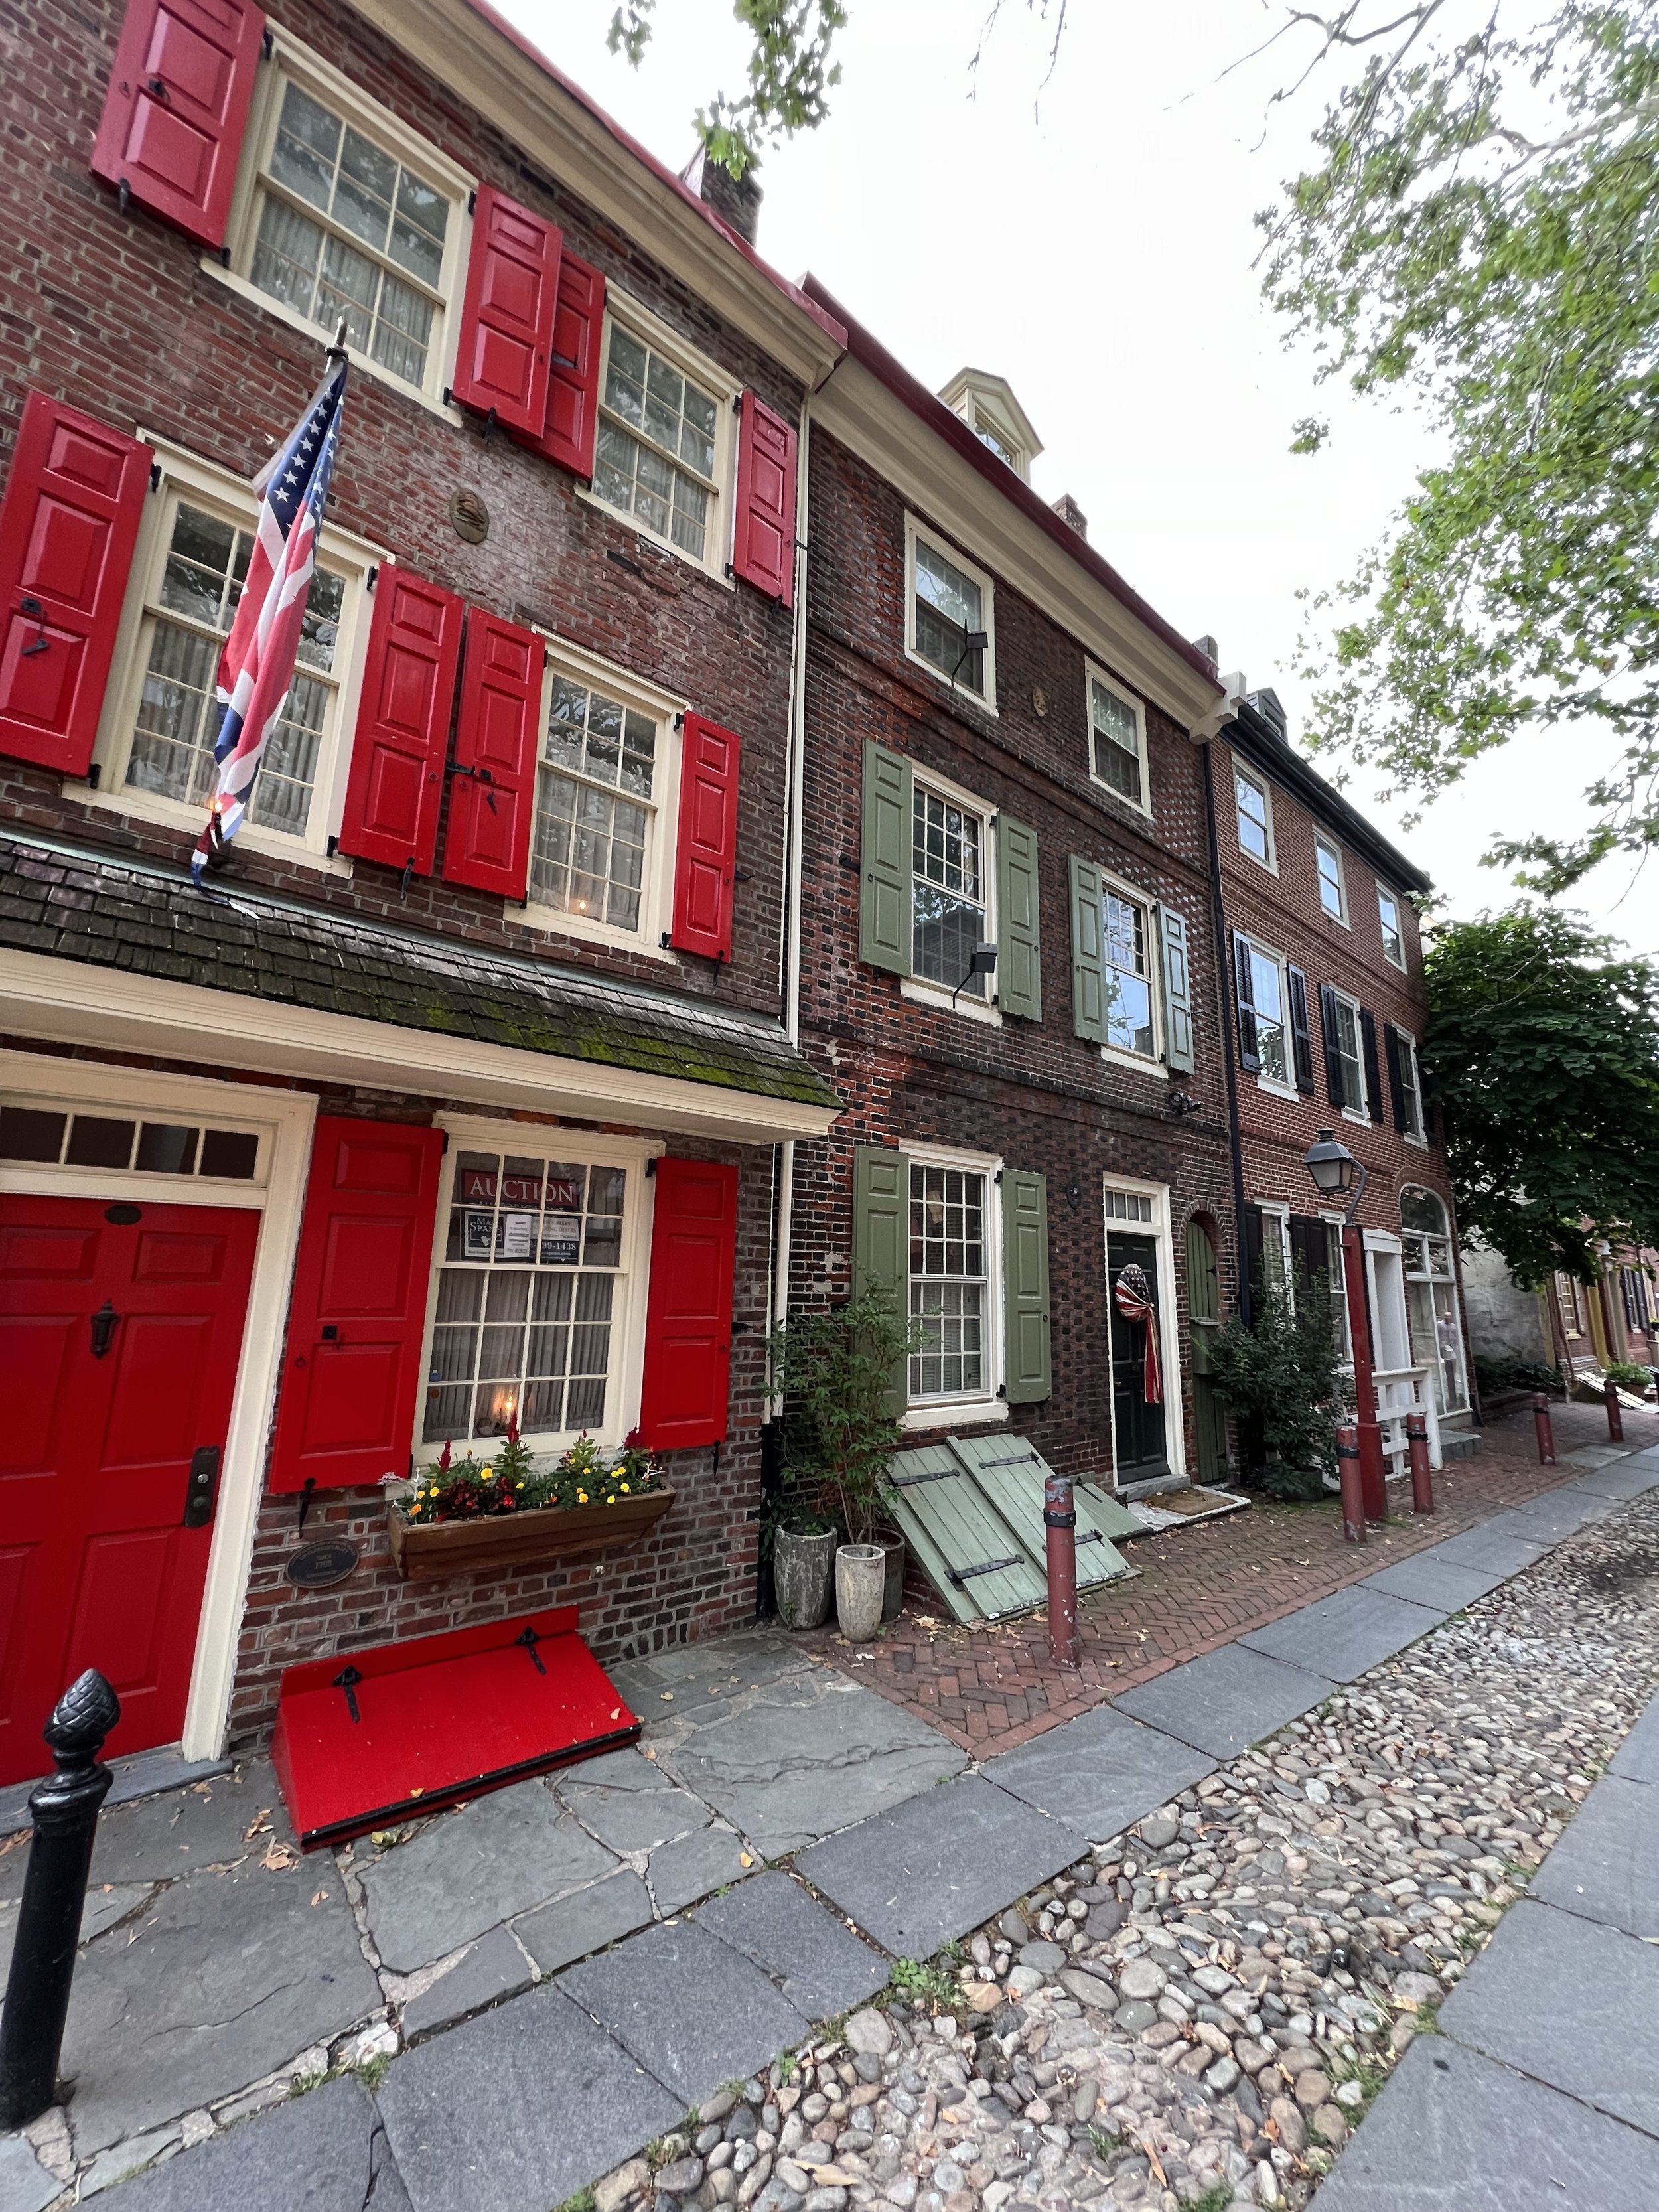 Interesting small historic district Philly